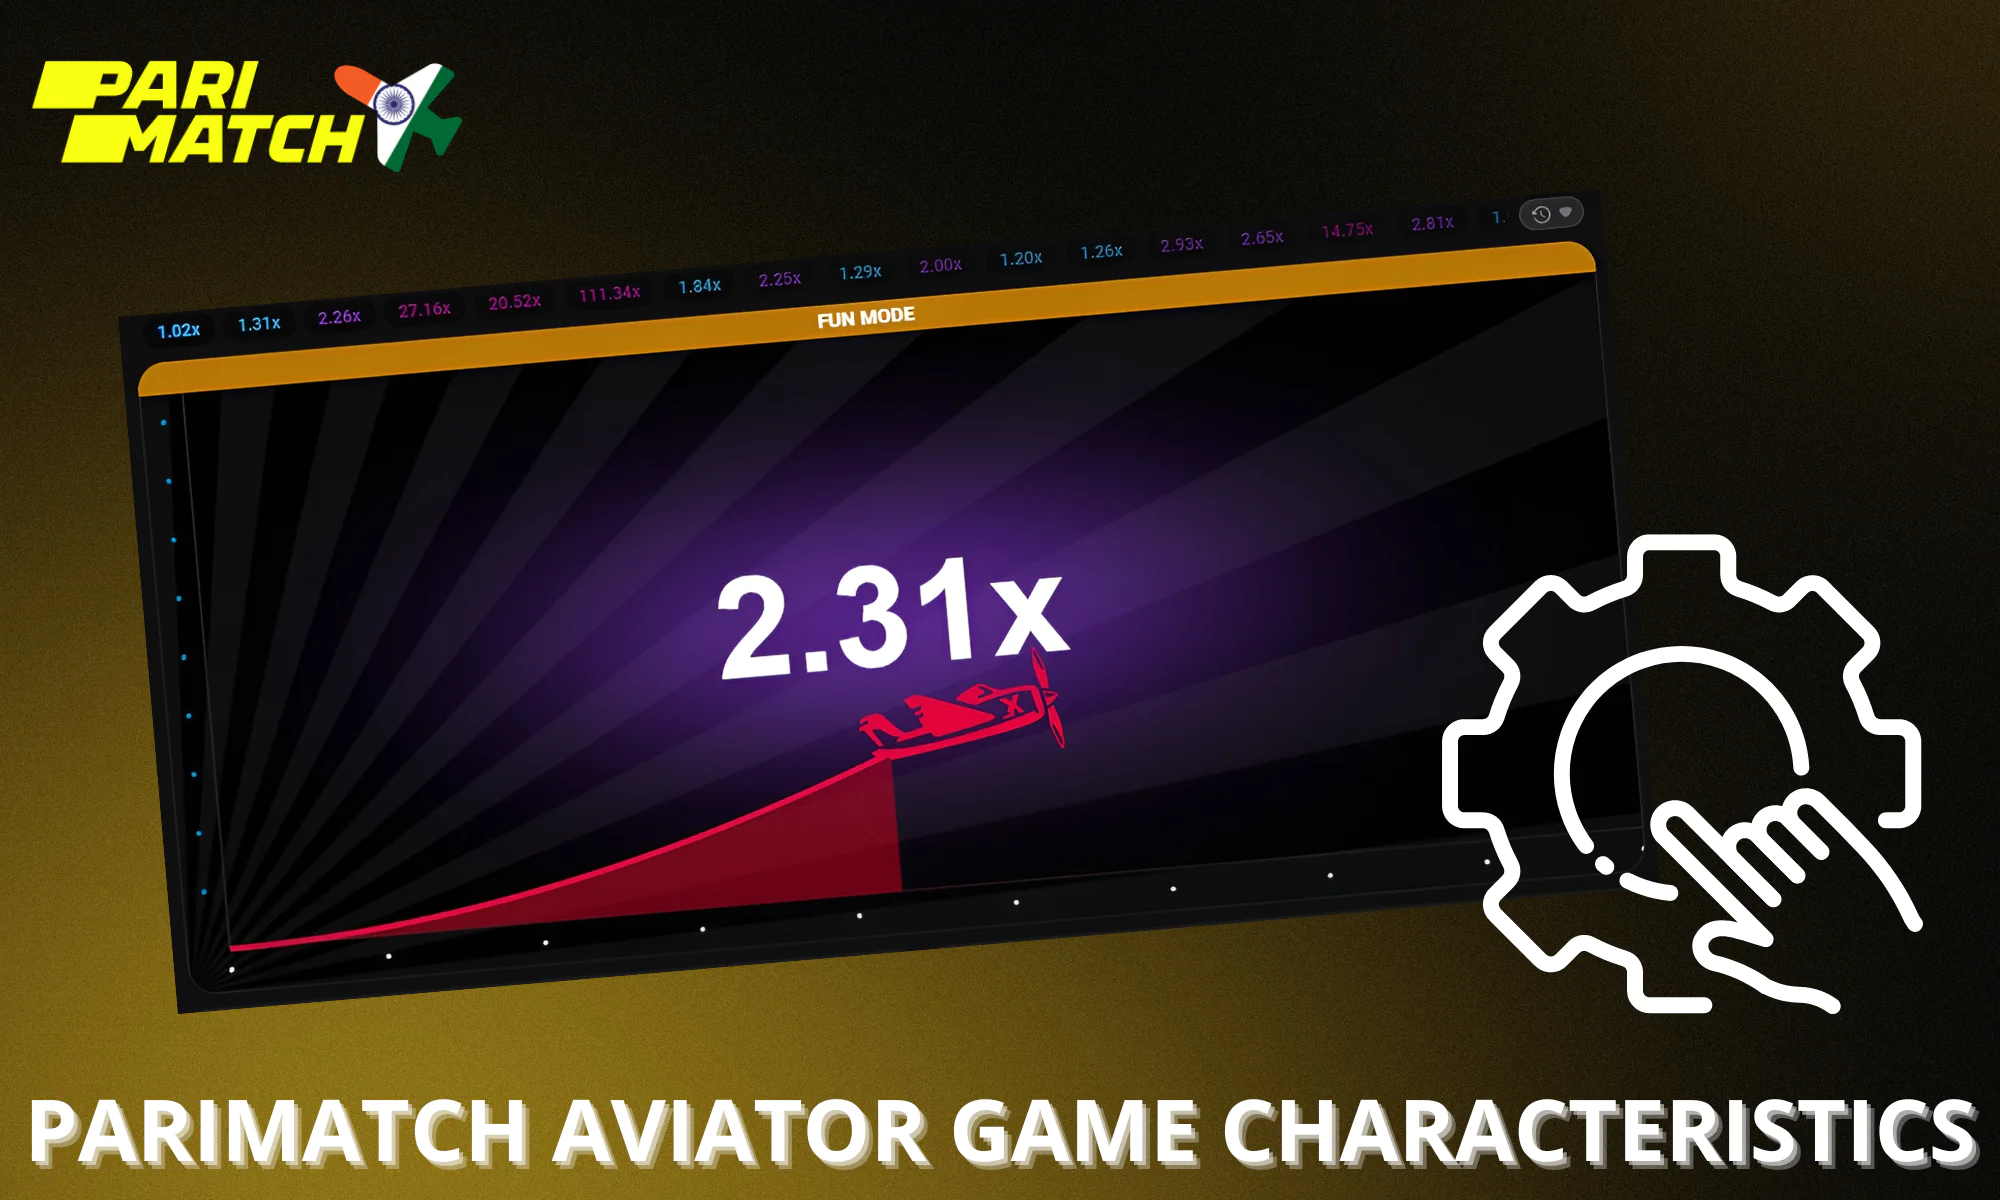 Learn more about Parimatch Aviator game features